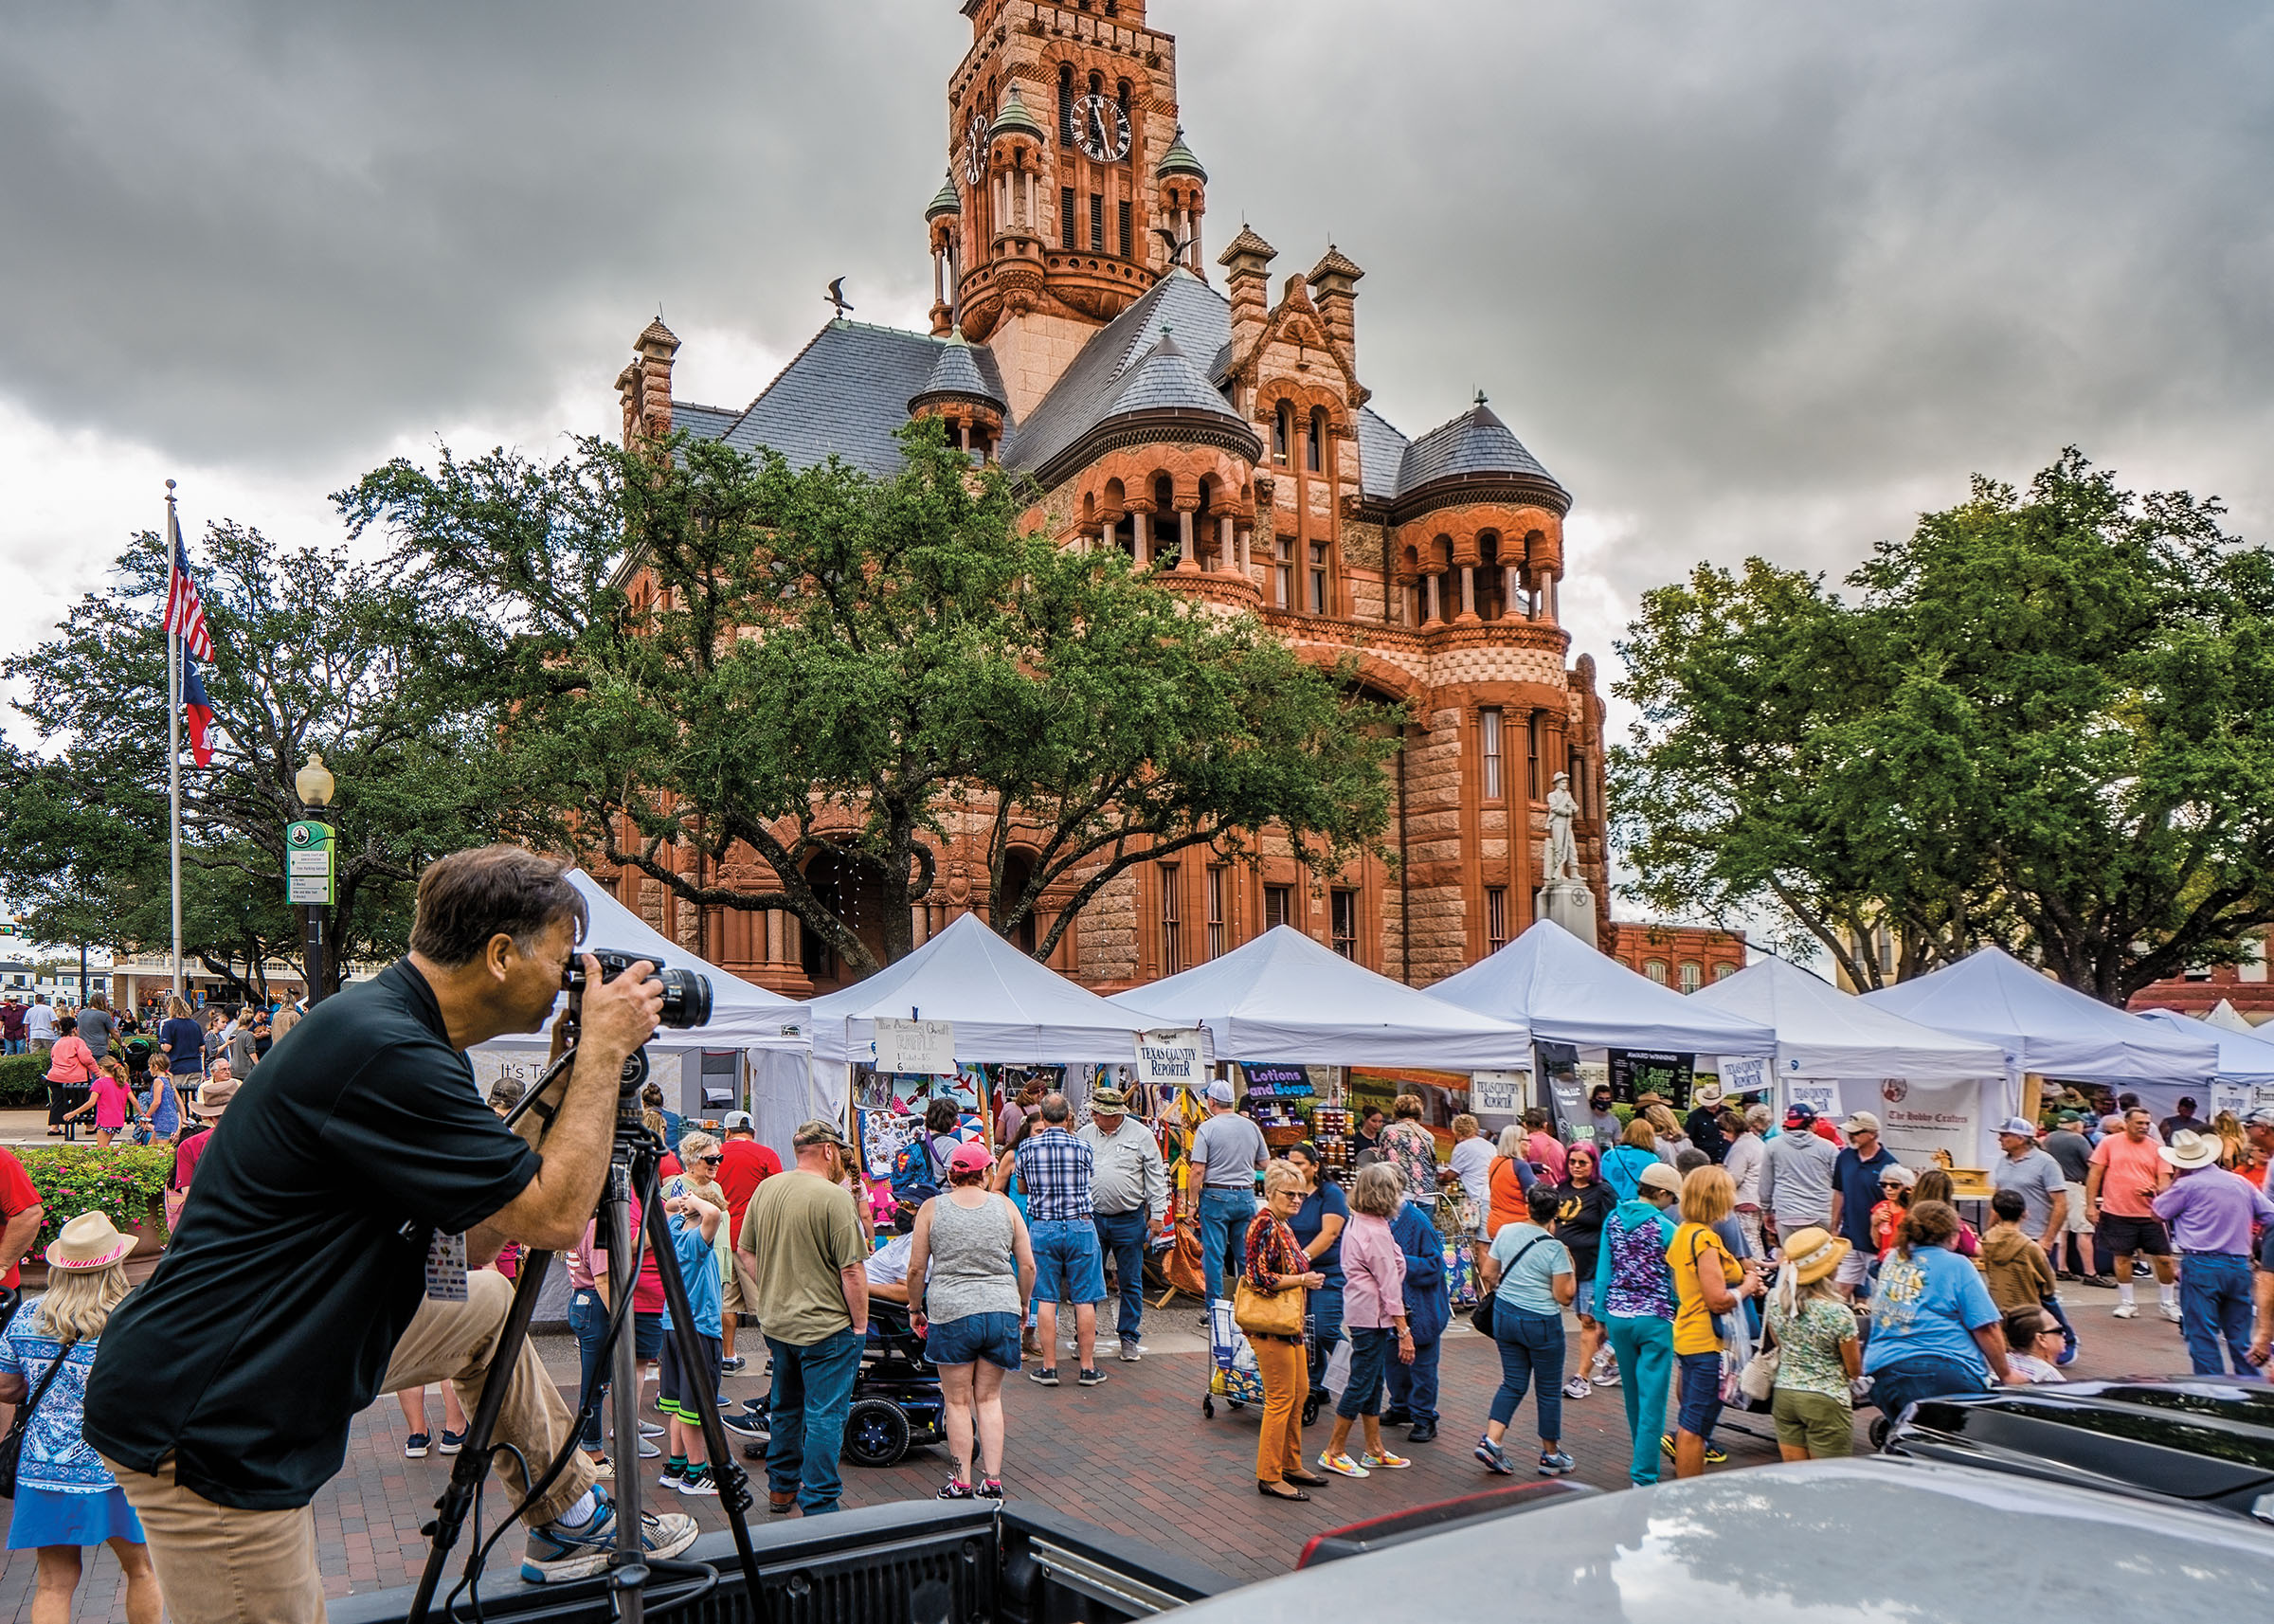 A man stands looking through a camera toward a crowd of people in front of white tents and a red-brick courthouse